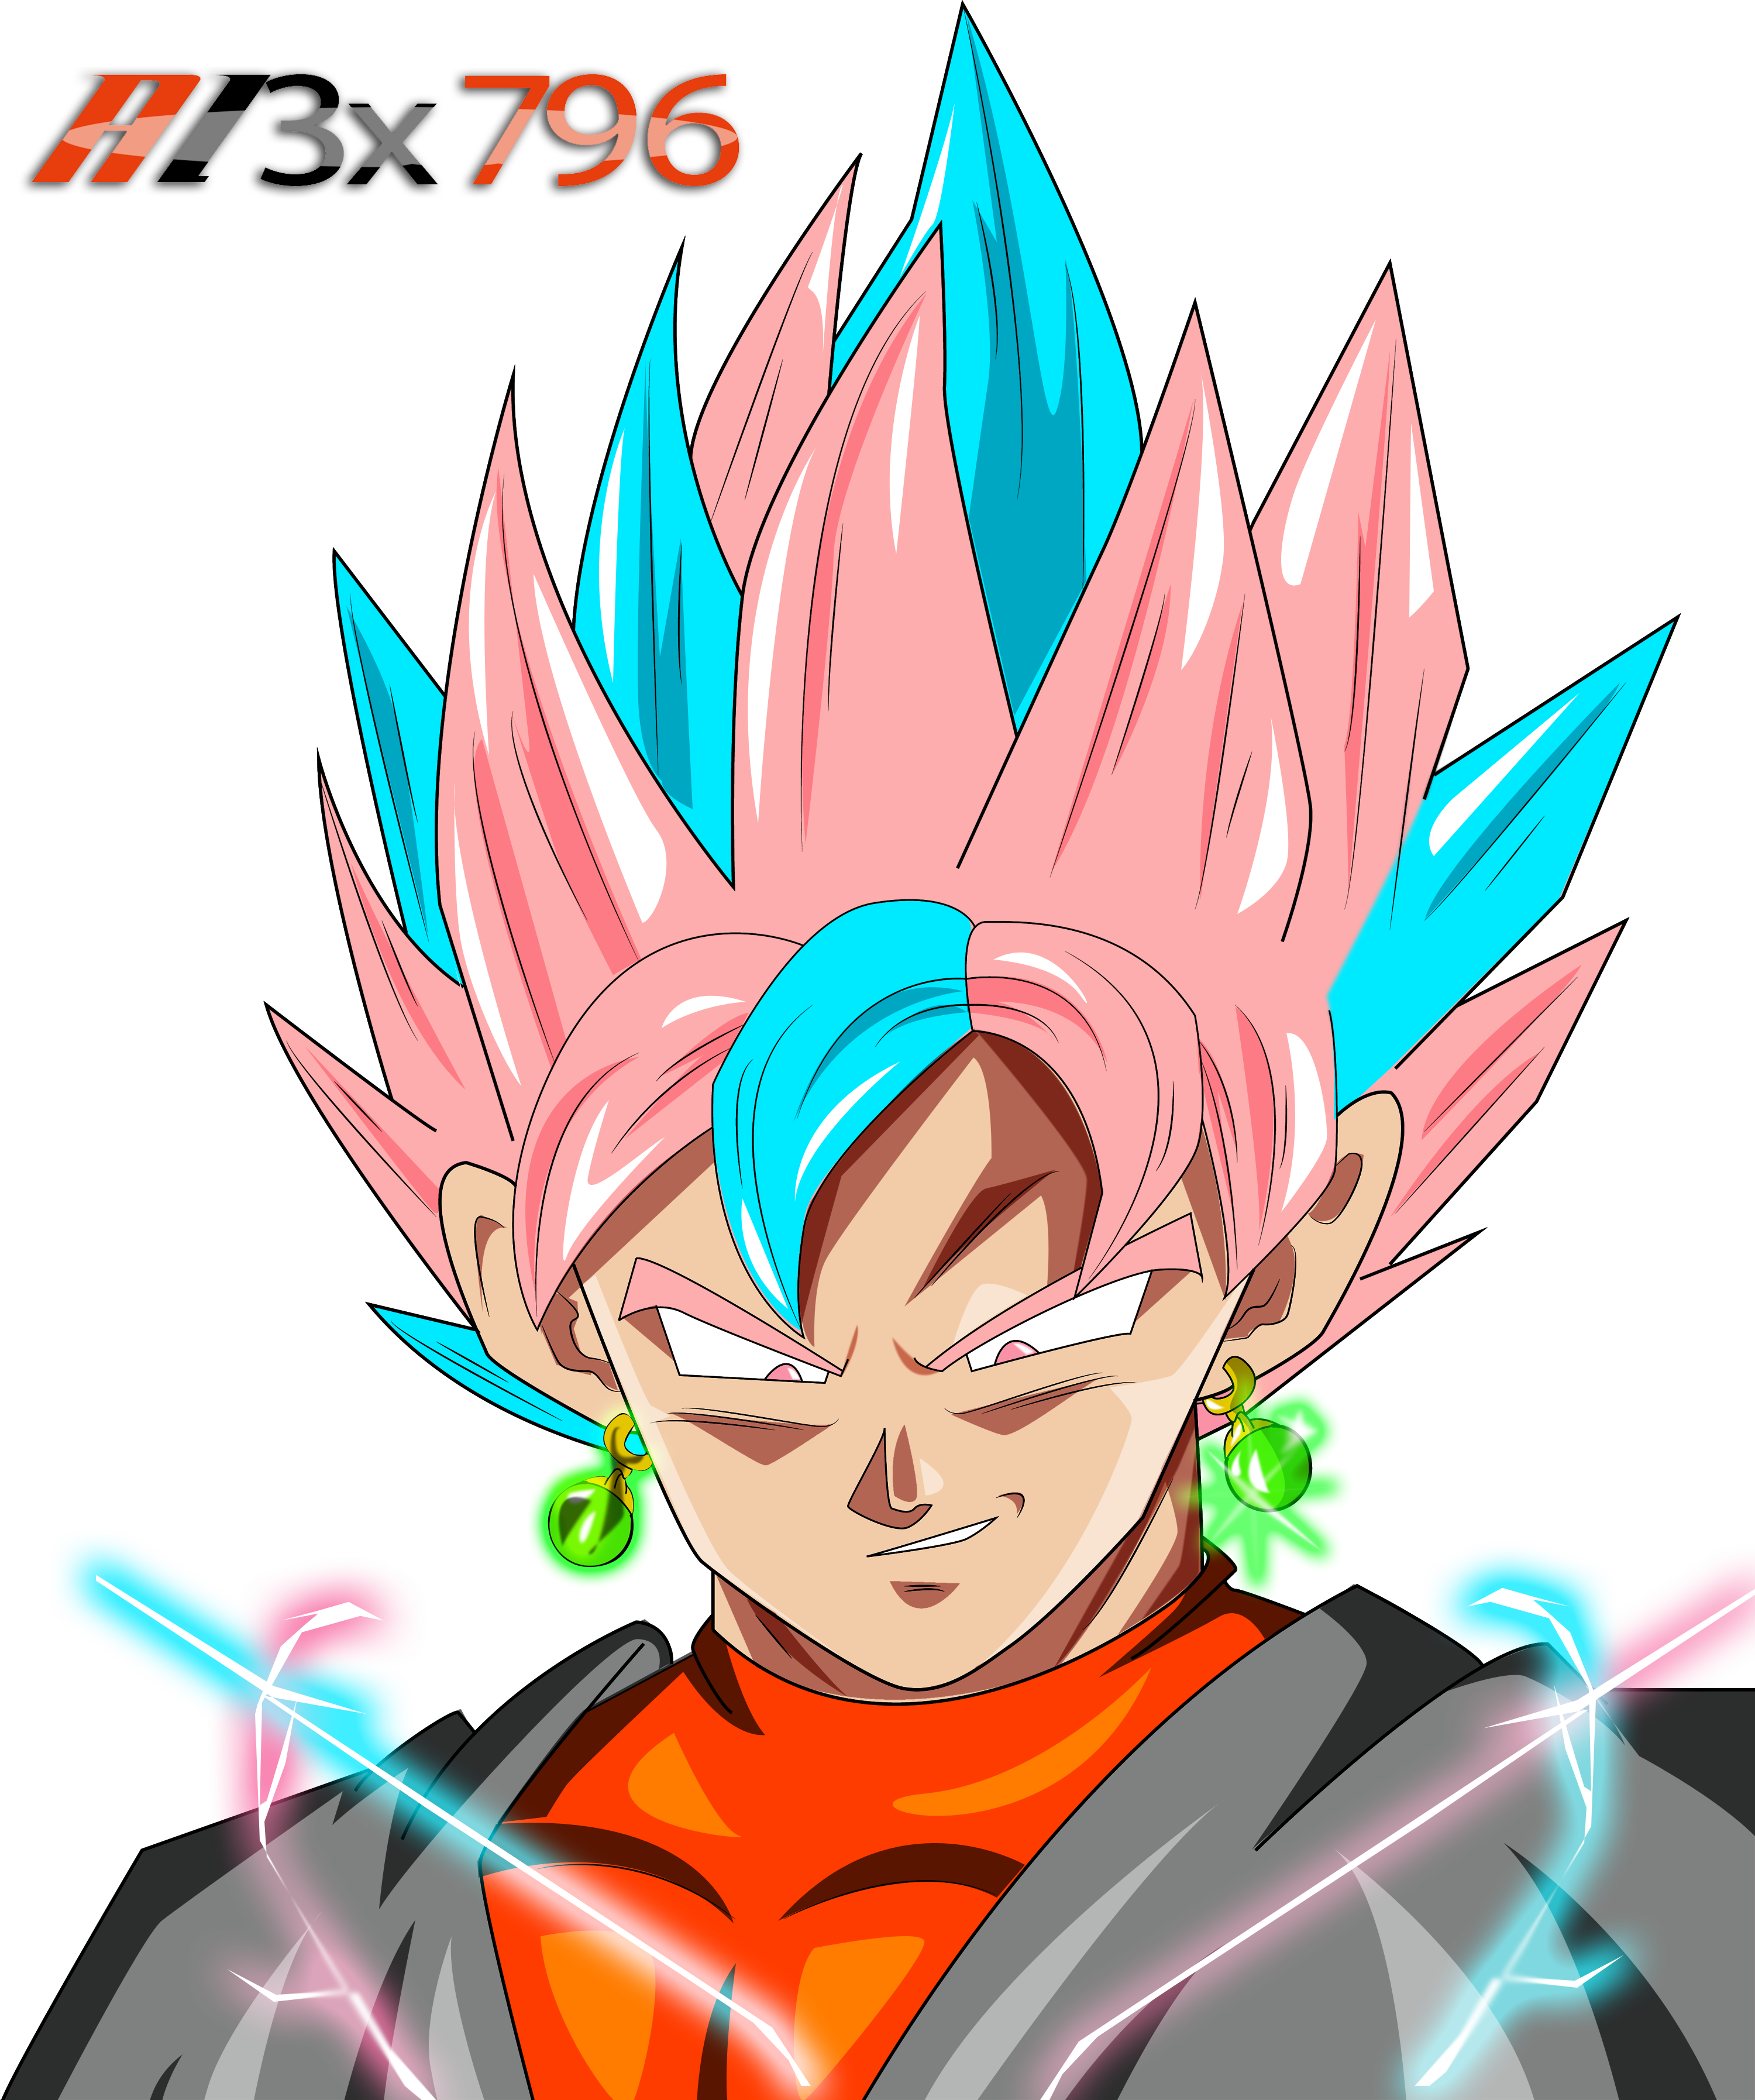 Black and Goku fusion by THEDATAGRAPHICS on DeviantArt